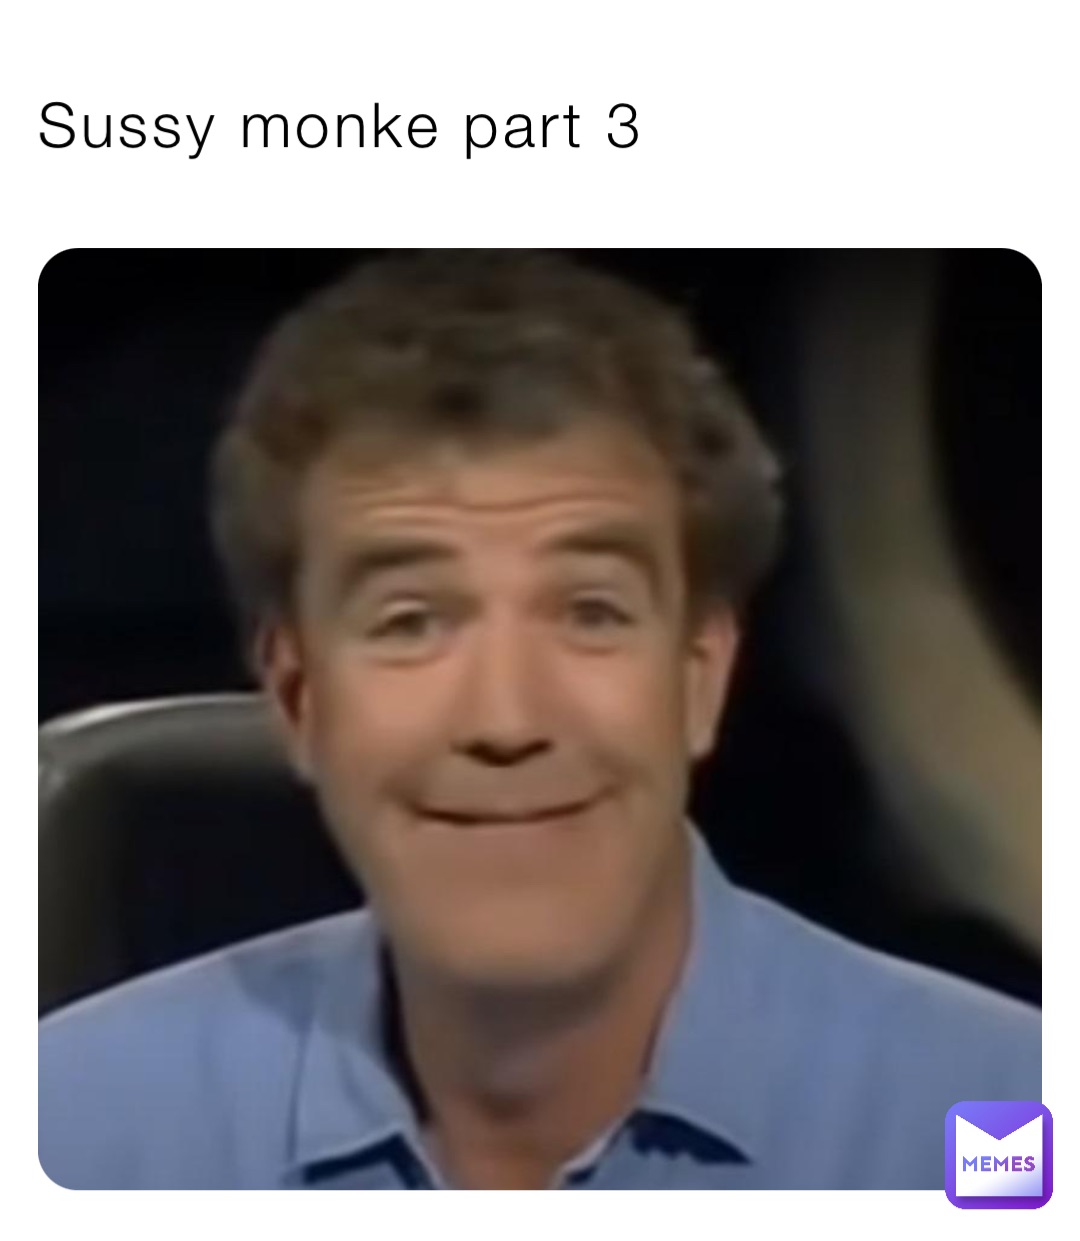 Sussy monke part 3